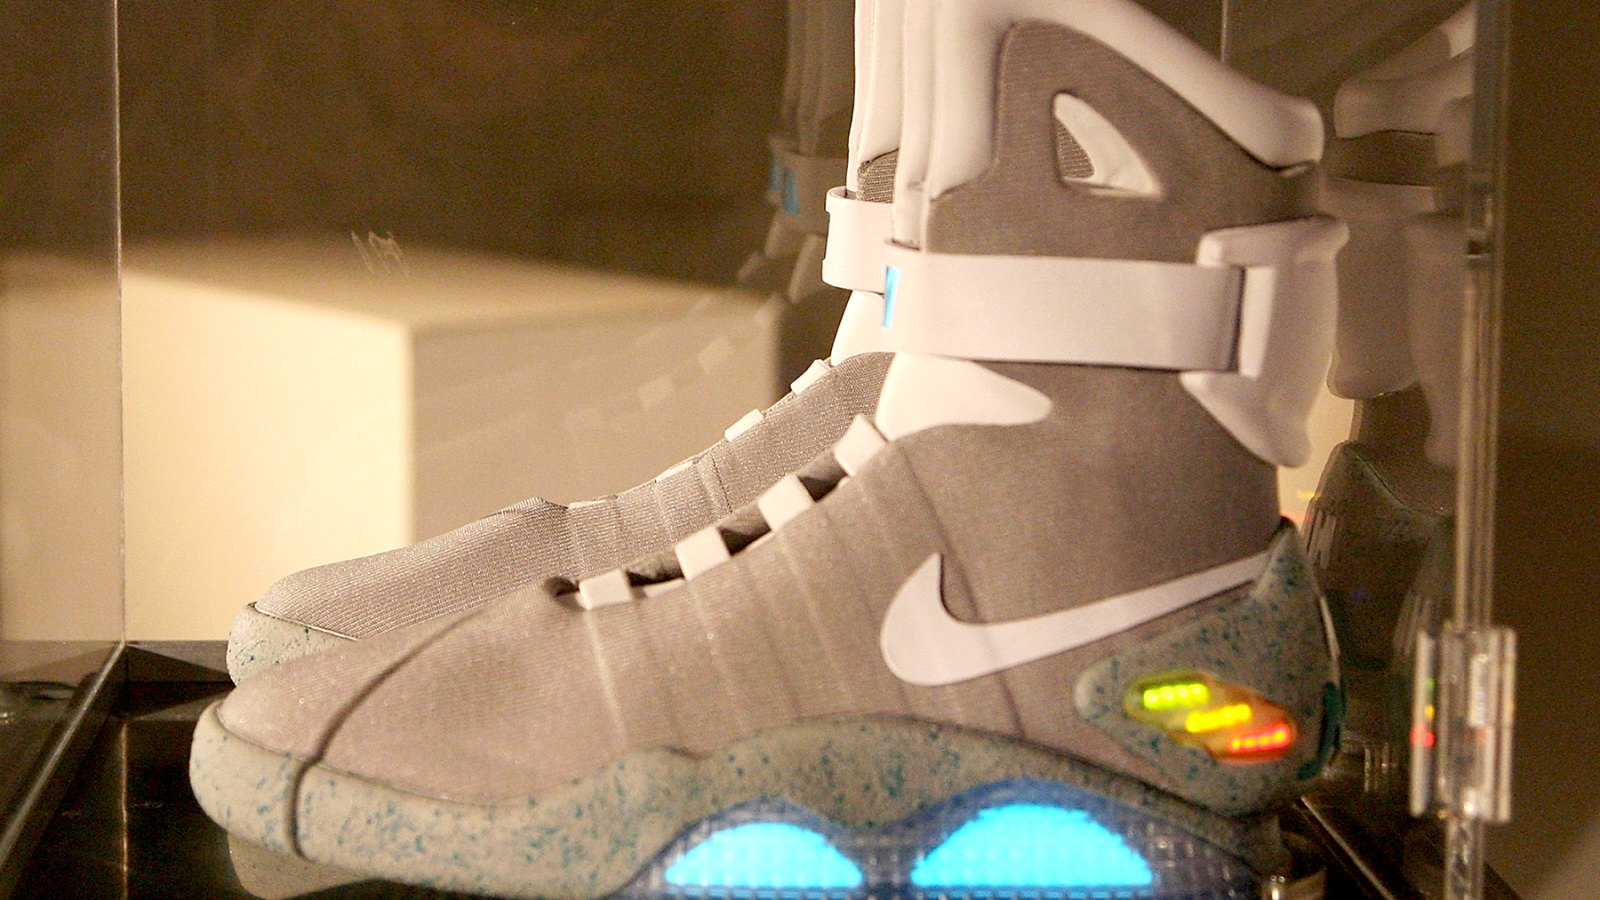 Rectangle regardless of exempt Back to the Future's Self-Tying Nike Shoes Are Real and Amazing